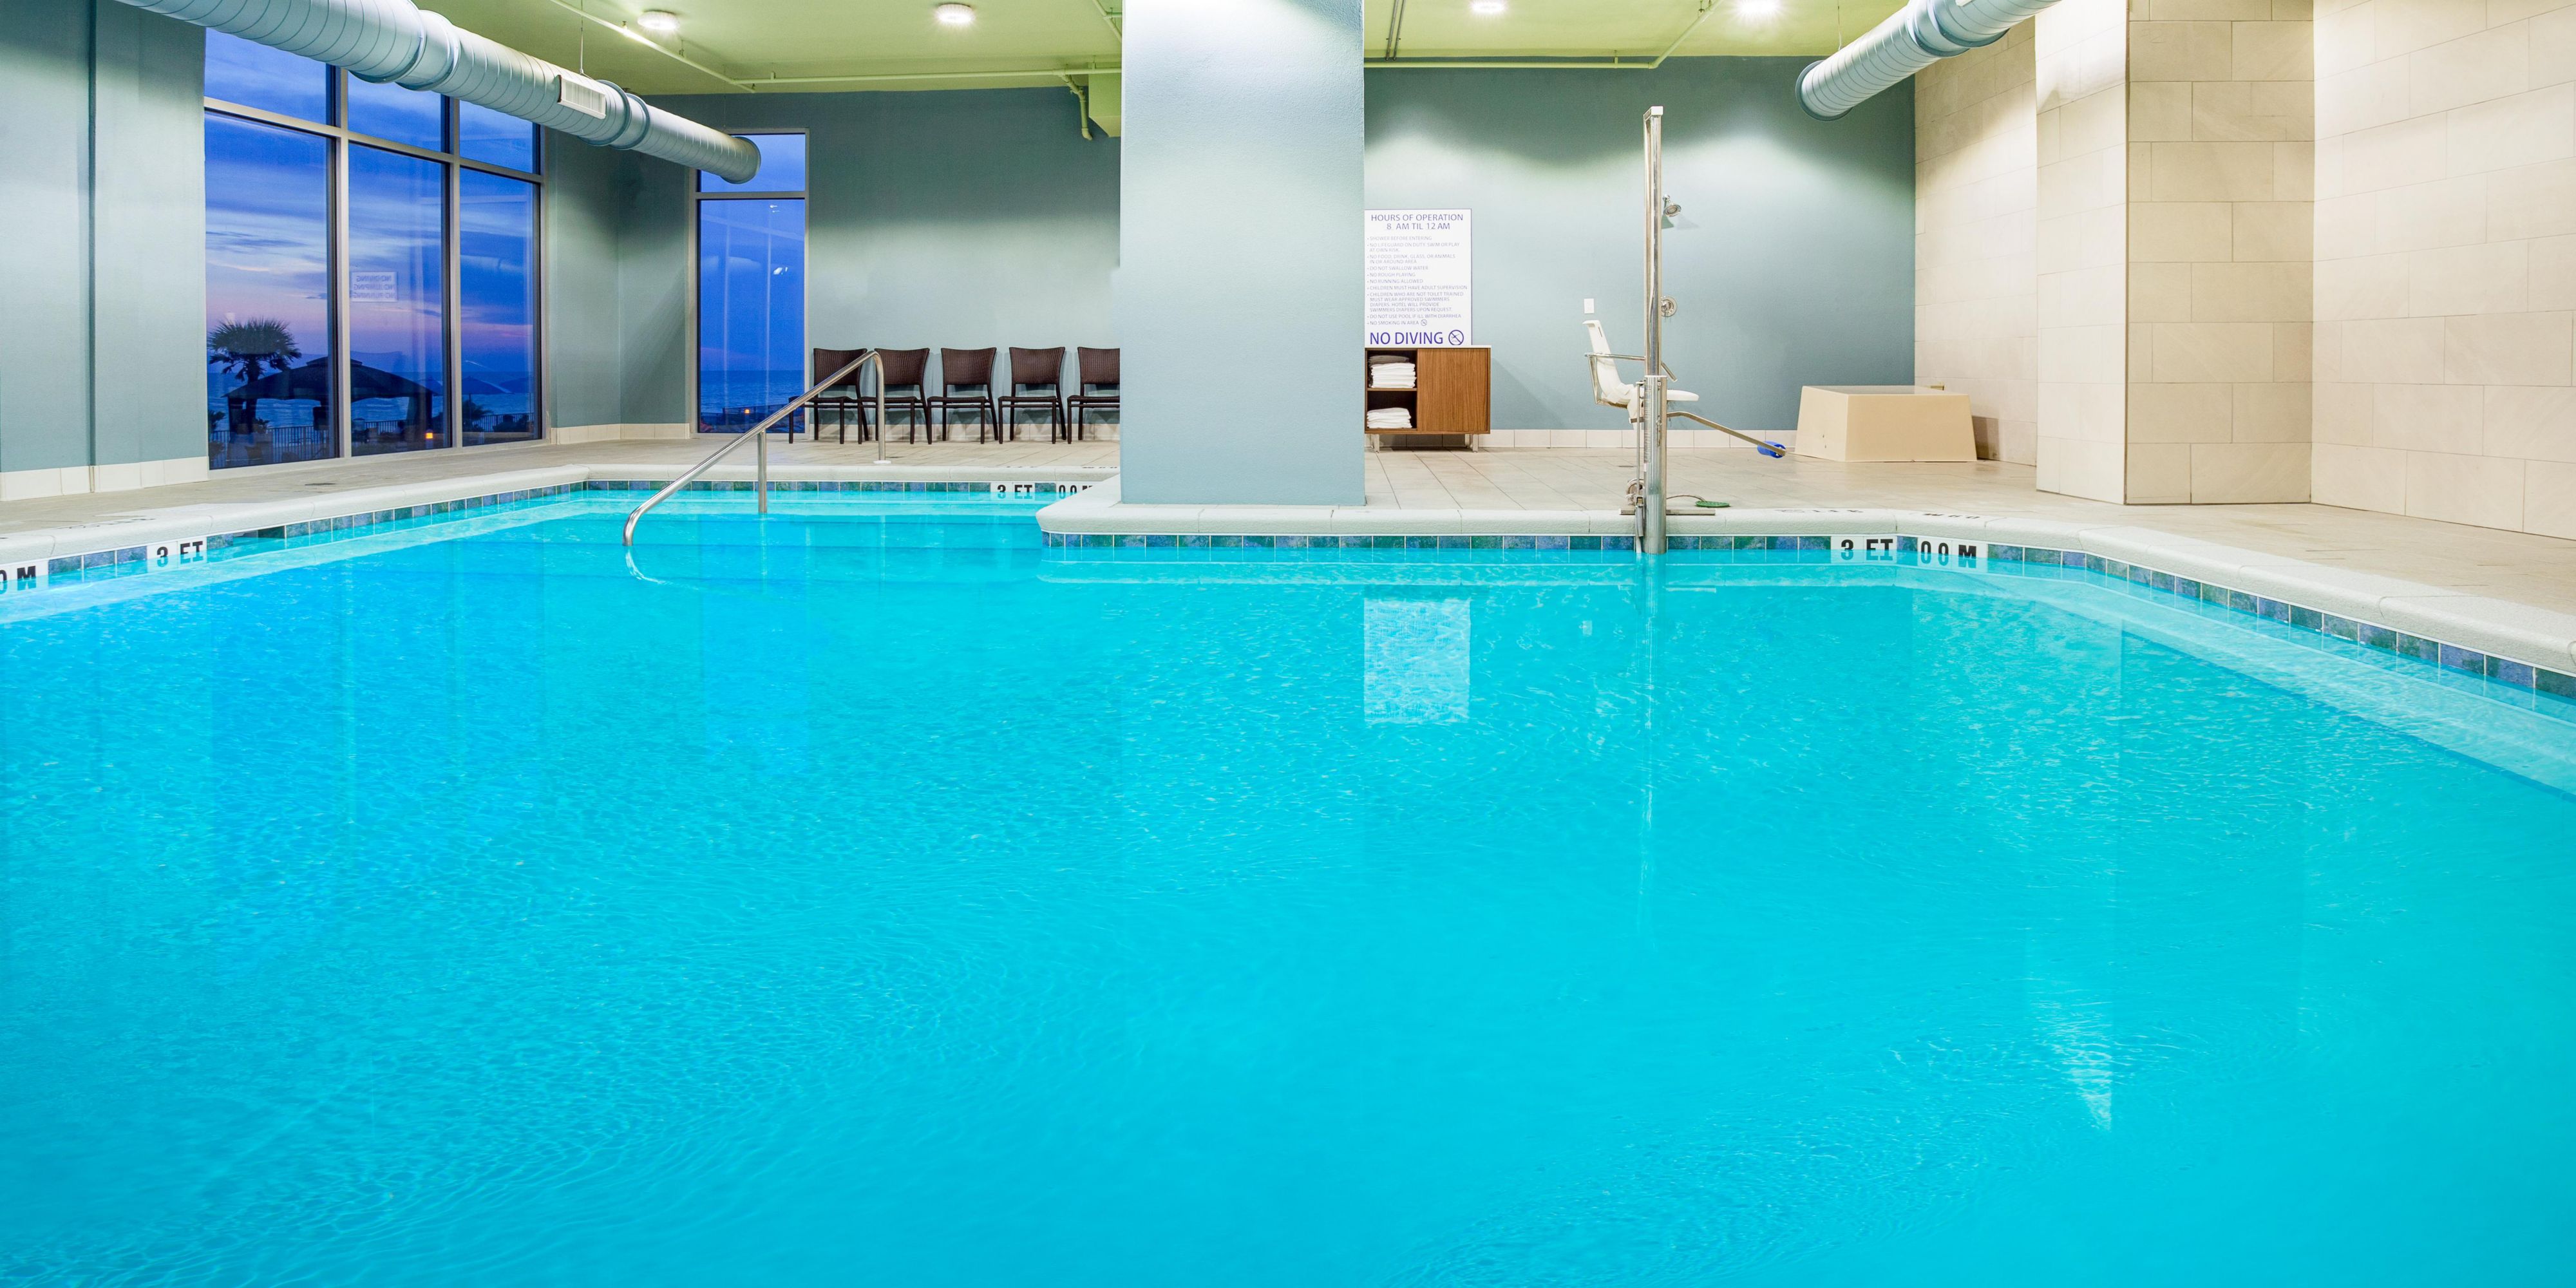 Take a dip in our inviting indoor pool, the perfect escape regardless of the weather. Unwind, swim, and rejuvenate in a climate-controlled environment. Dive into fun and explore our refreshing amenities.